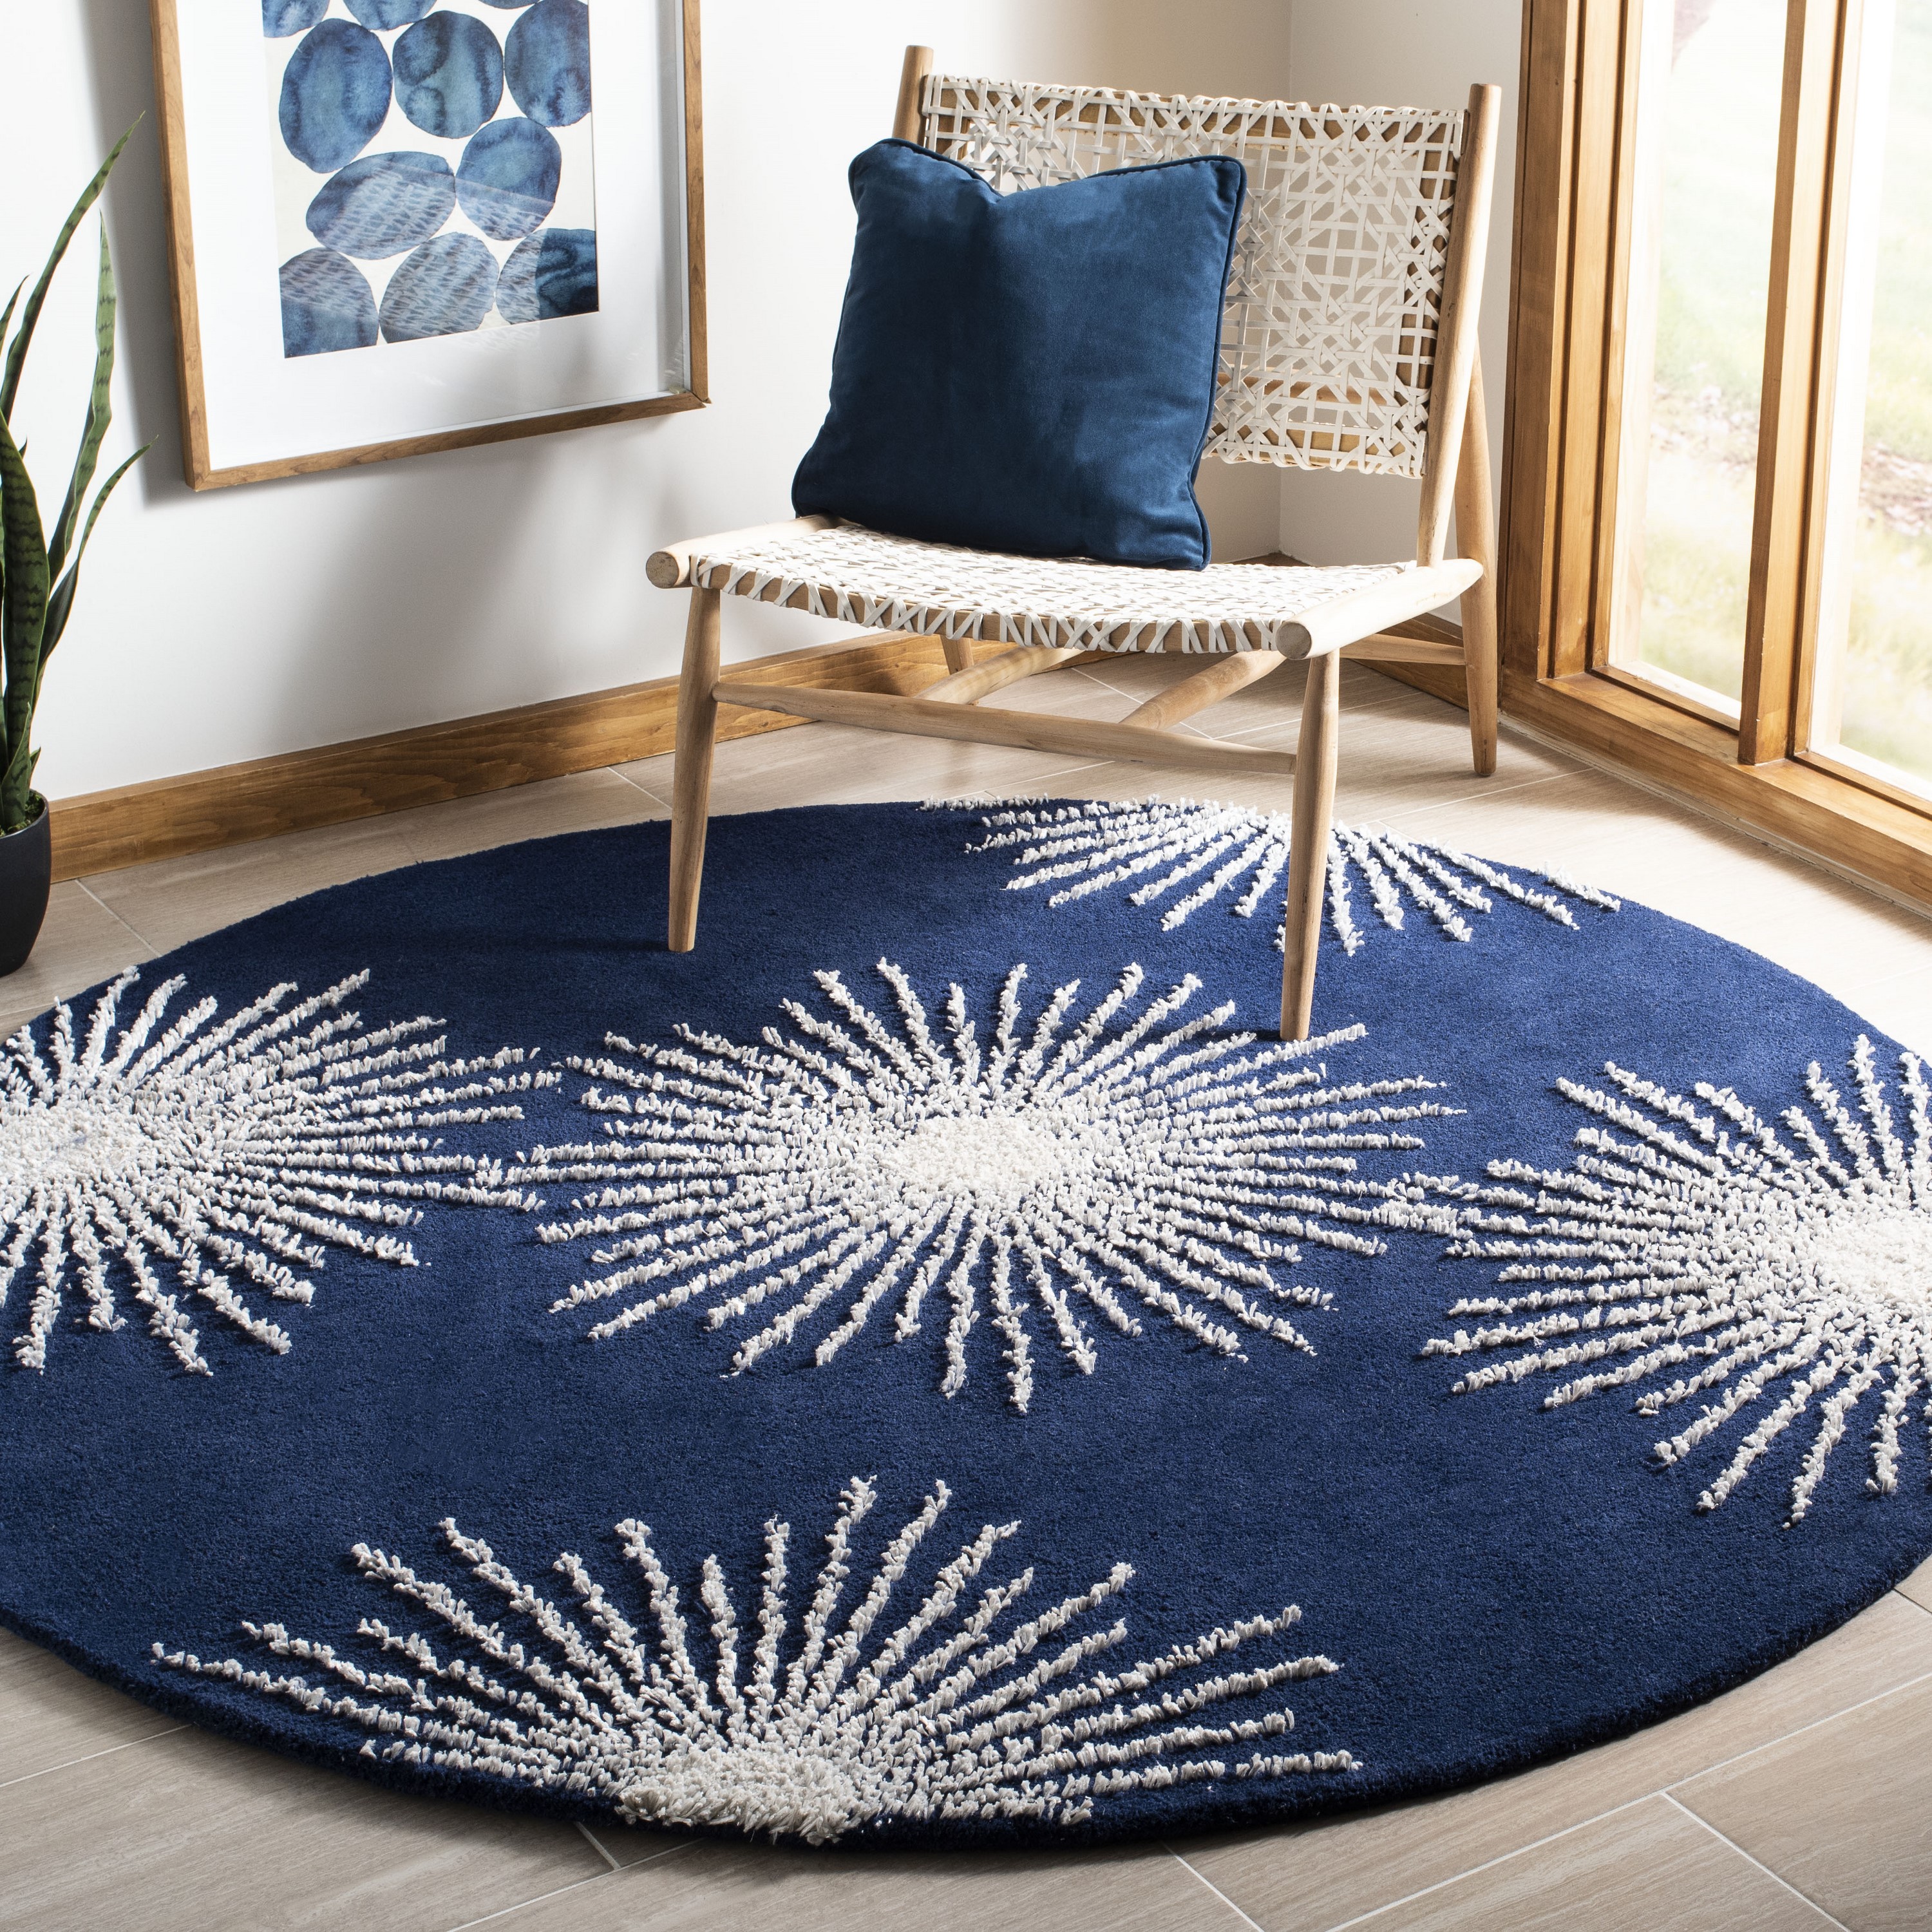 Blue Round Rugs at